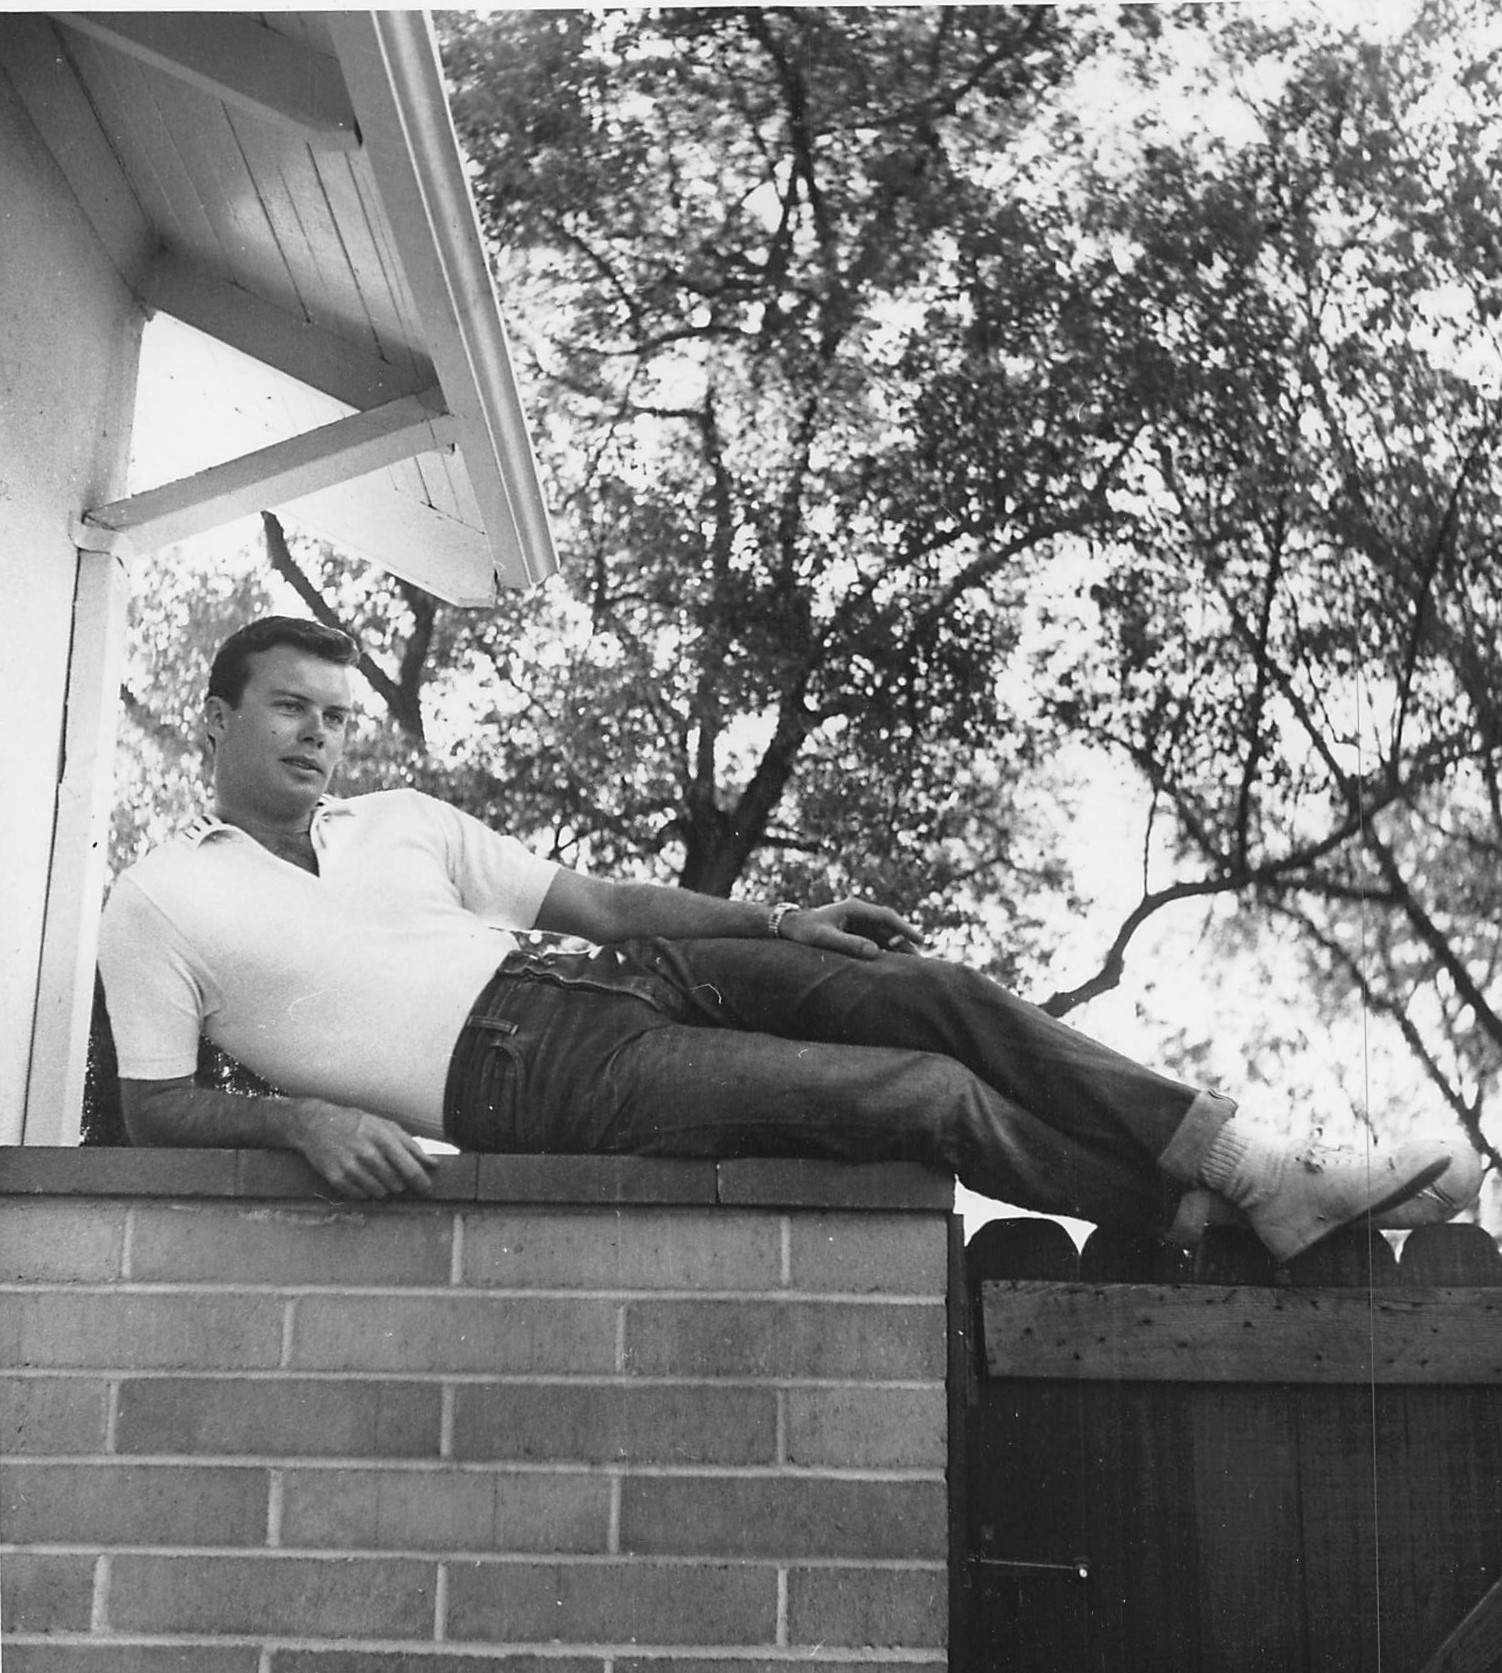  212, c. Jan. 1955. Bob “relaxing" on wall/fence on left side of house leading from front yard to area outside two bedrooms .  Photo: Larry Barberi for Globe Photos, New York City. “Weekend with the Folks”/”A Day to Loaf,”  Screenplay , July 1955. 